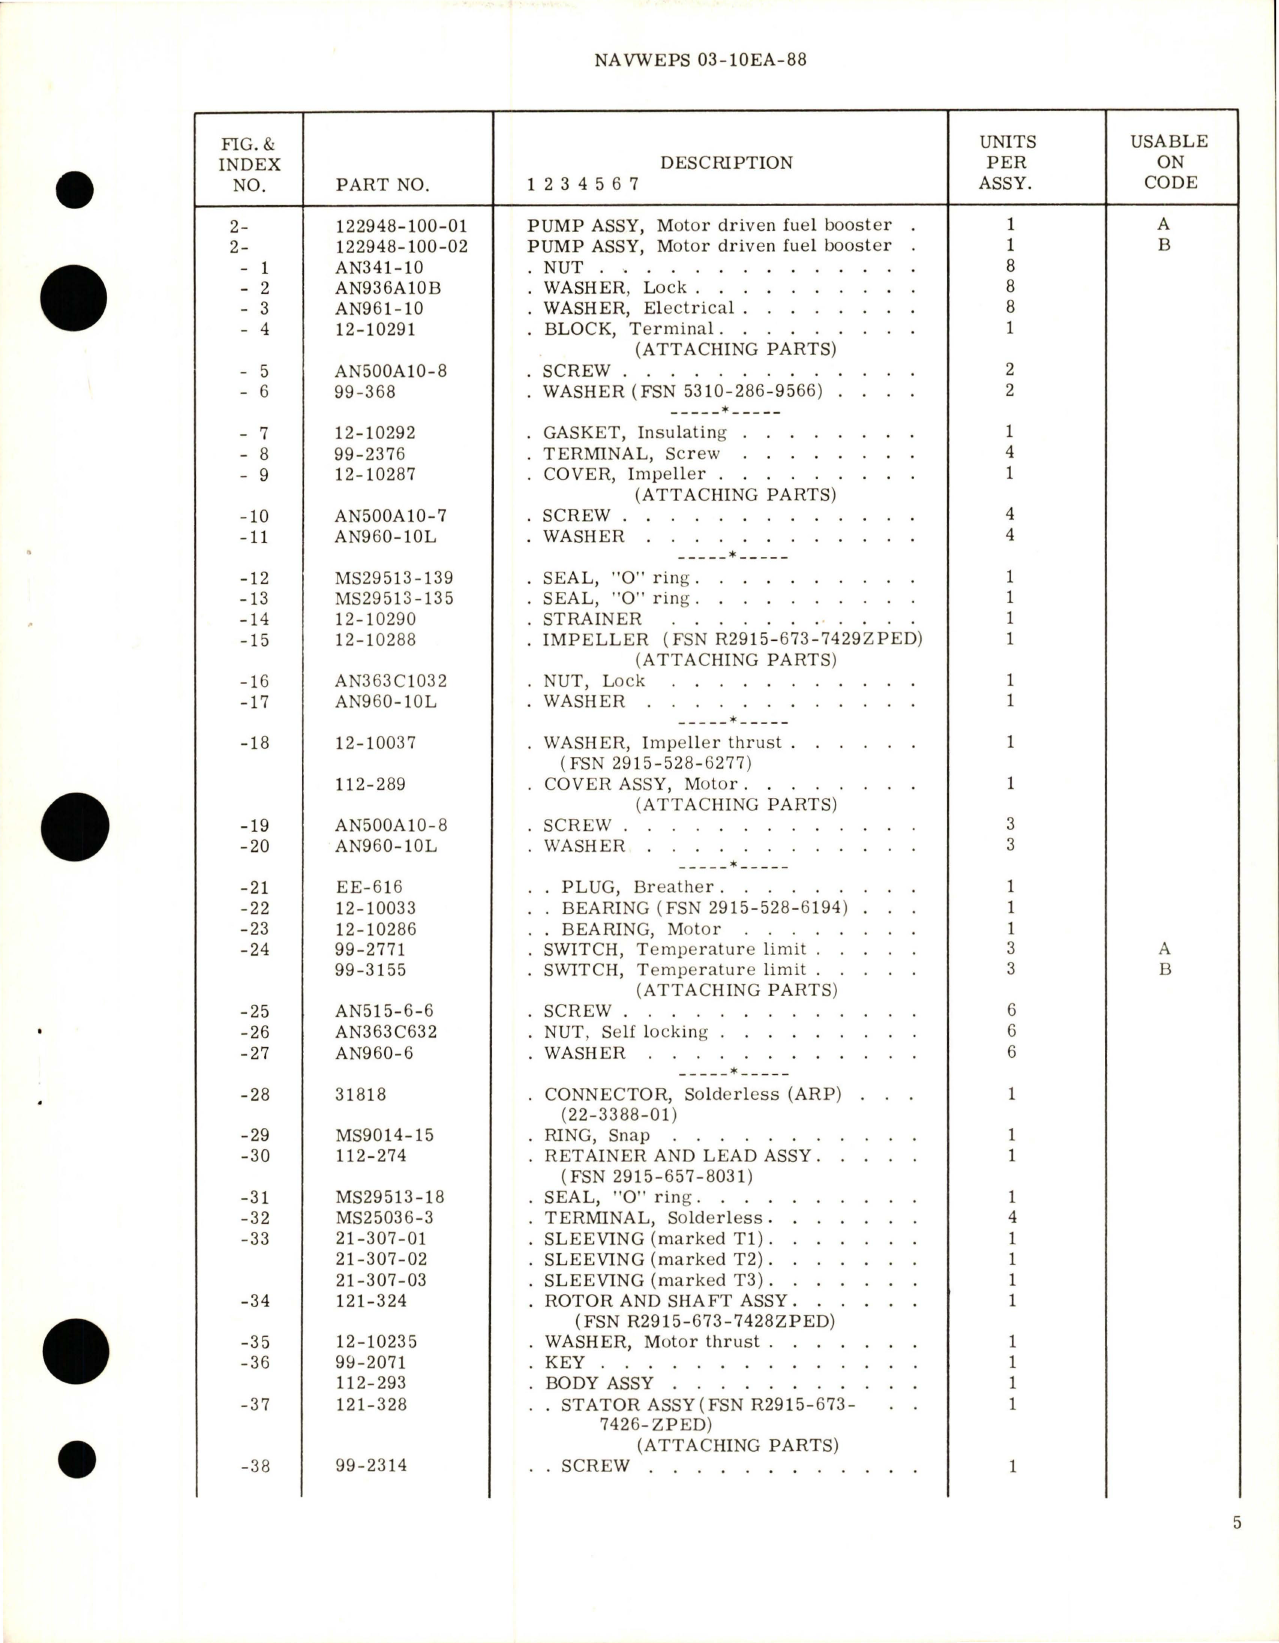 Sample page 5 from AirCorps Library document: Overhaul Instructions with Parts Breakdown for Motor Driven Fuel Booster Pump Assembly - Model 122948-100-01 and 122948-100-02